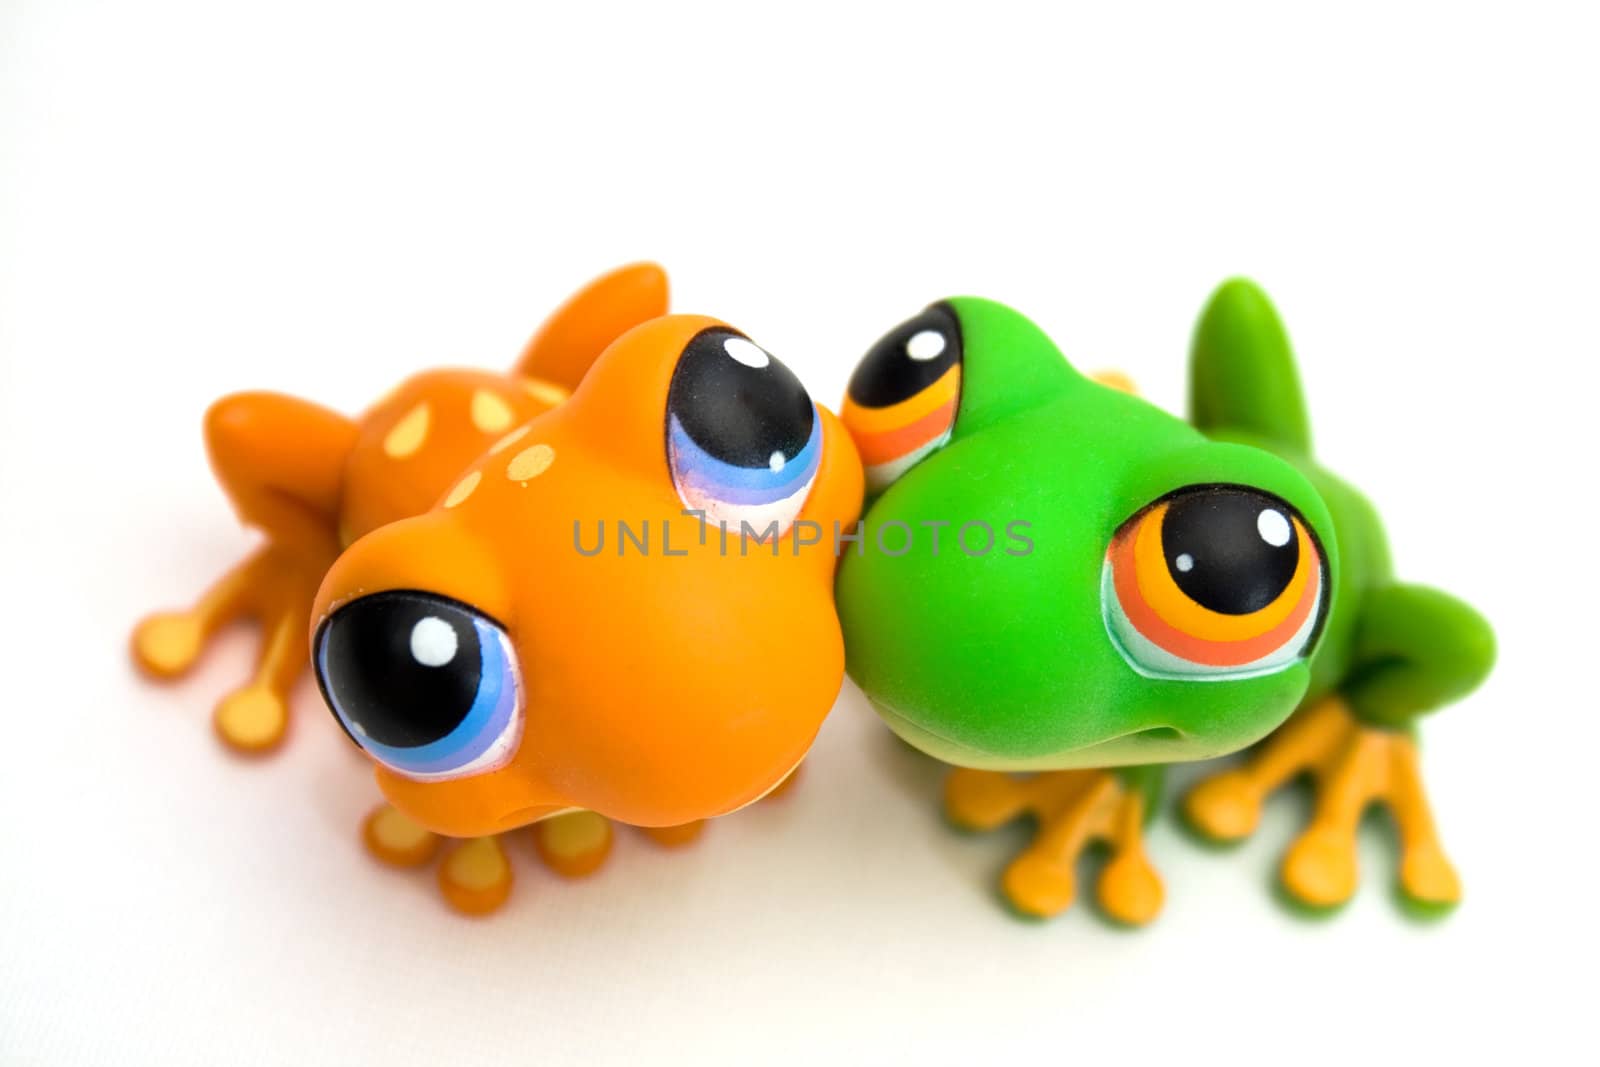 Two plastic frog toys, one orange and one green, isolated on white background.